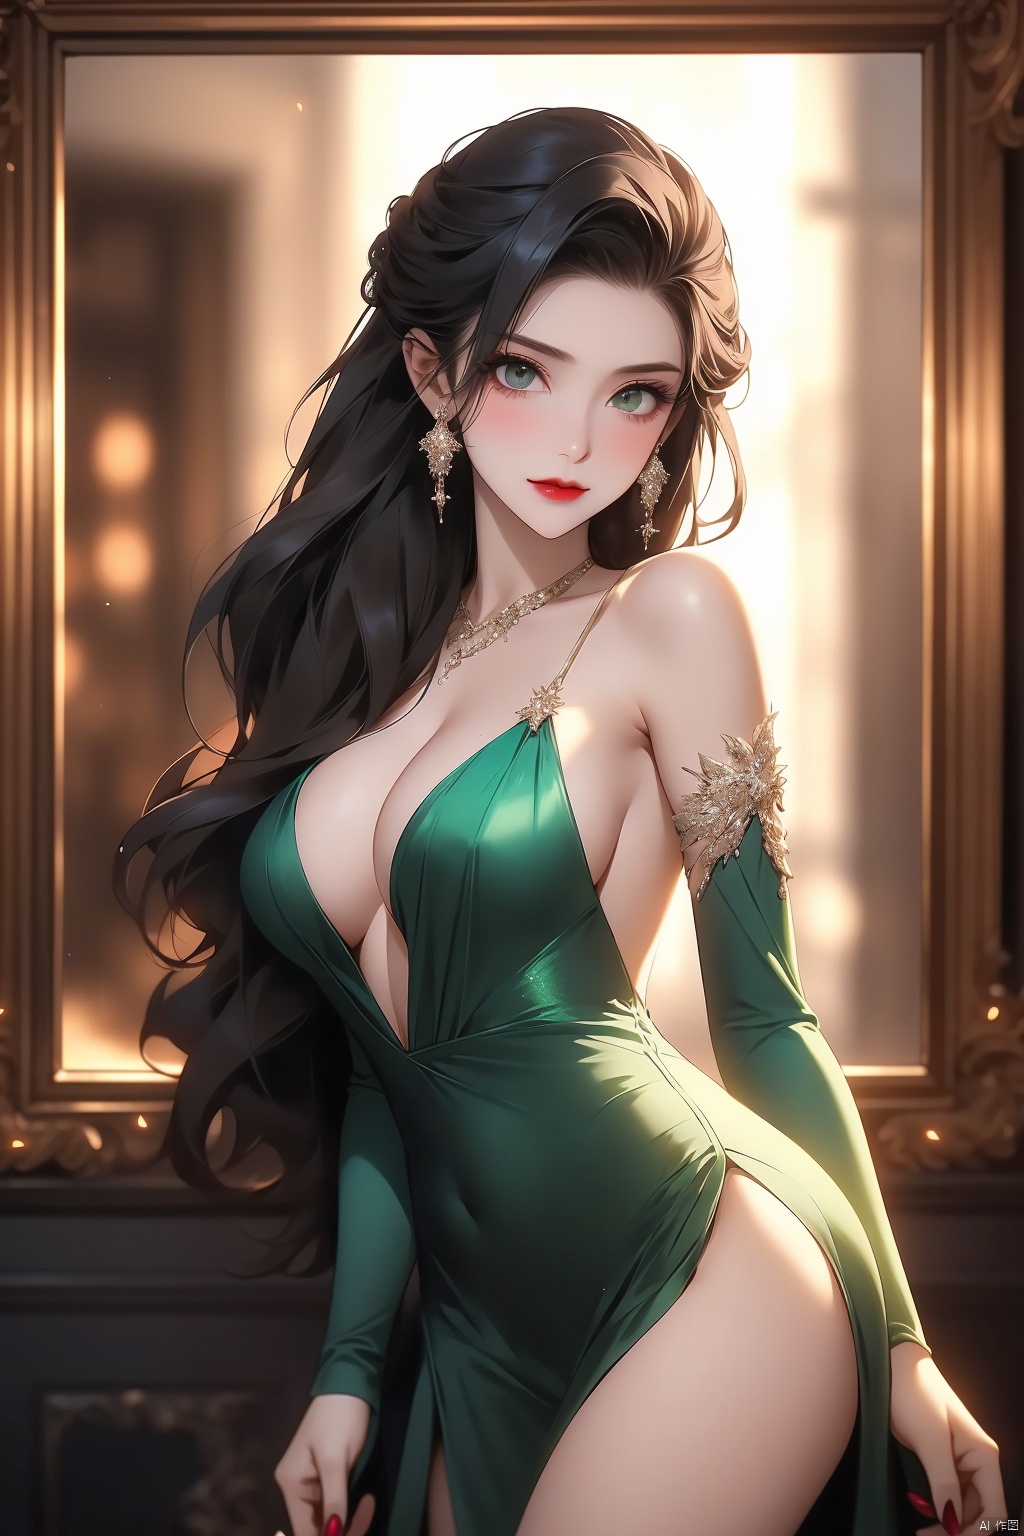 alluring stepmother, dressed in a form-fitting emerald green evening gown, deep V-neckline accentuating her curves, long flowing sleeves and a thigh-high slit revealing a hint of toned legs, strappy metallic stiletto heels adding height and allure, posed within a dimly lit mansion hallway adorned with antique mirrors and oil paintings, cascading raven hair partially swept up in an elegant chignon, adorned with statement jewelry pieces, smoky eye makeup and ruby red lipstick, sensually gazing into the distance, conveying a mix of mystery and sophistication